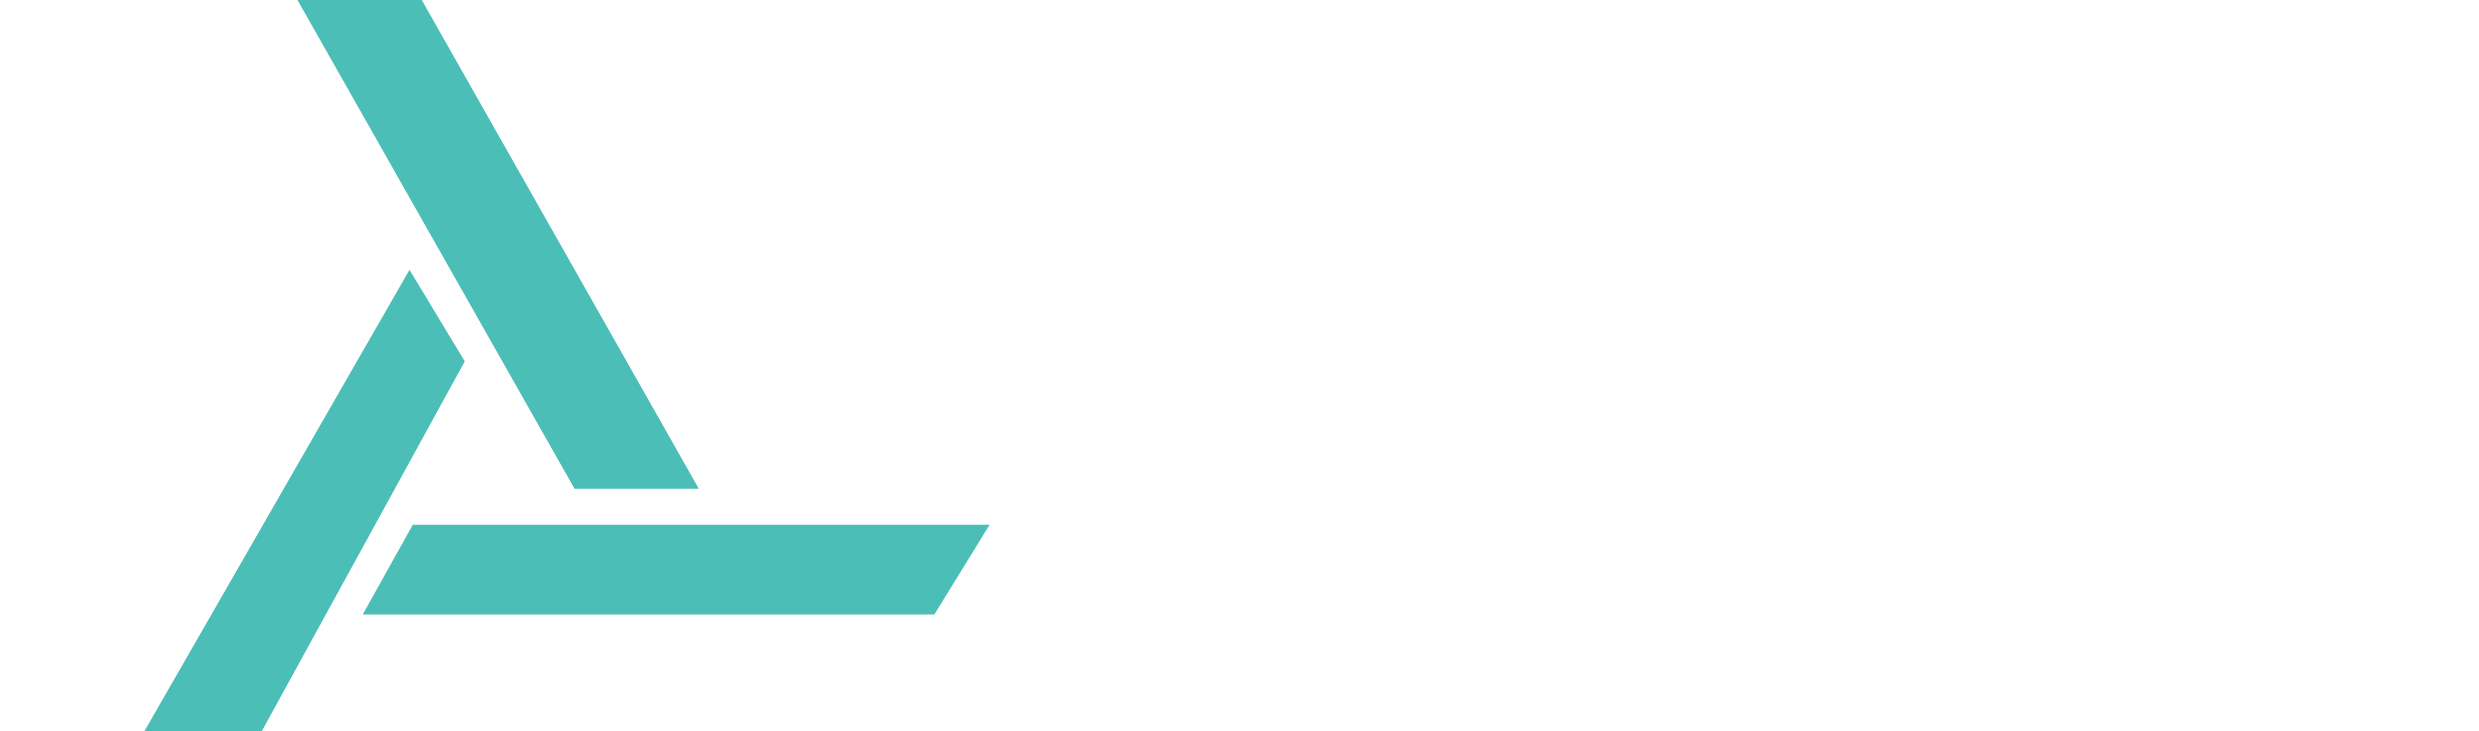 ACC Consumer Finance LLC | Solutions Tailored for Gig and Rideshare Drivers